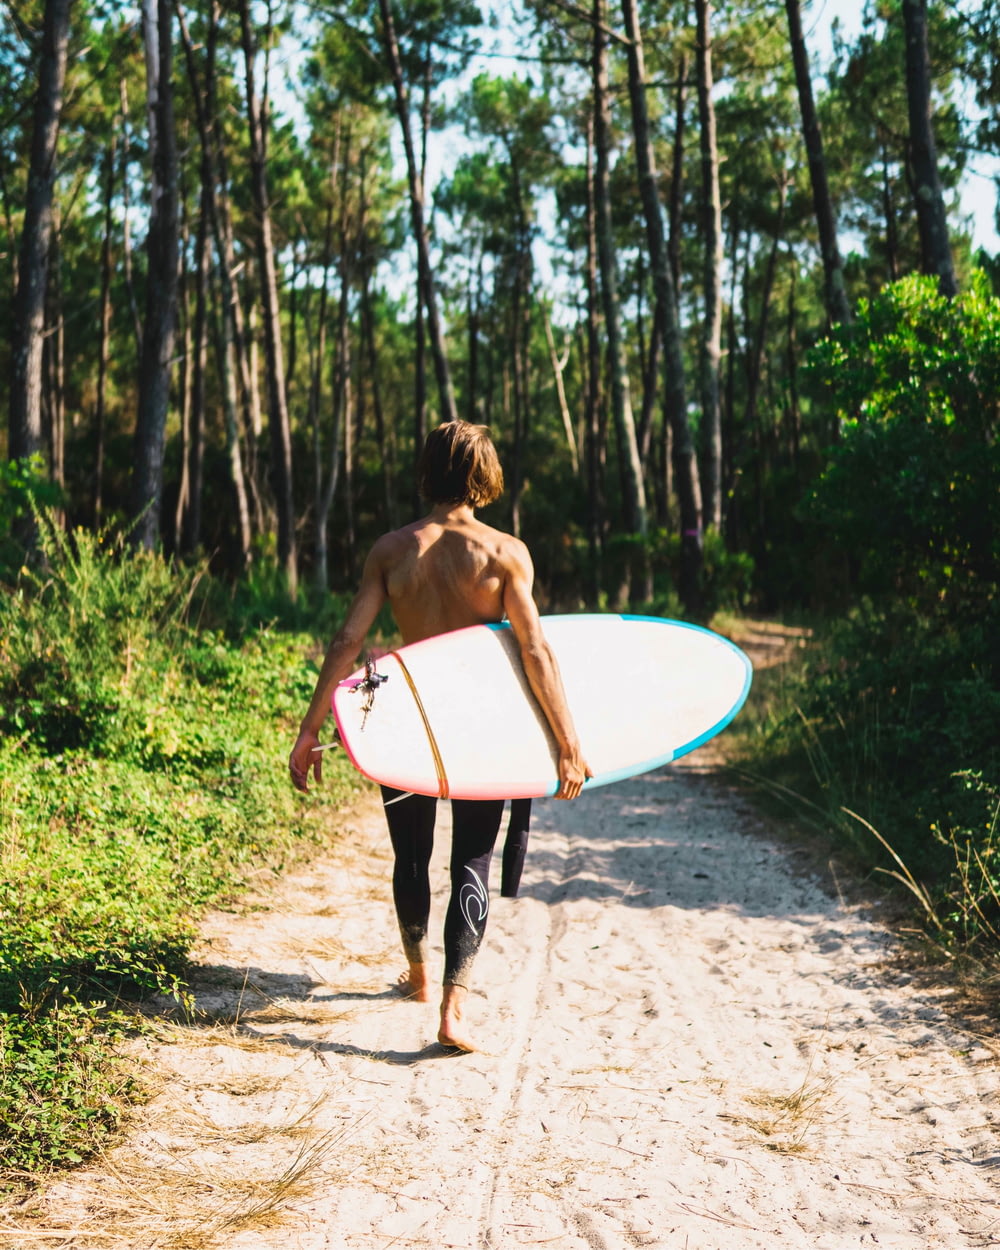 woman in black and white bikini holding white surfboard walking on dirt road during daytime